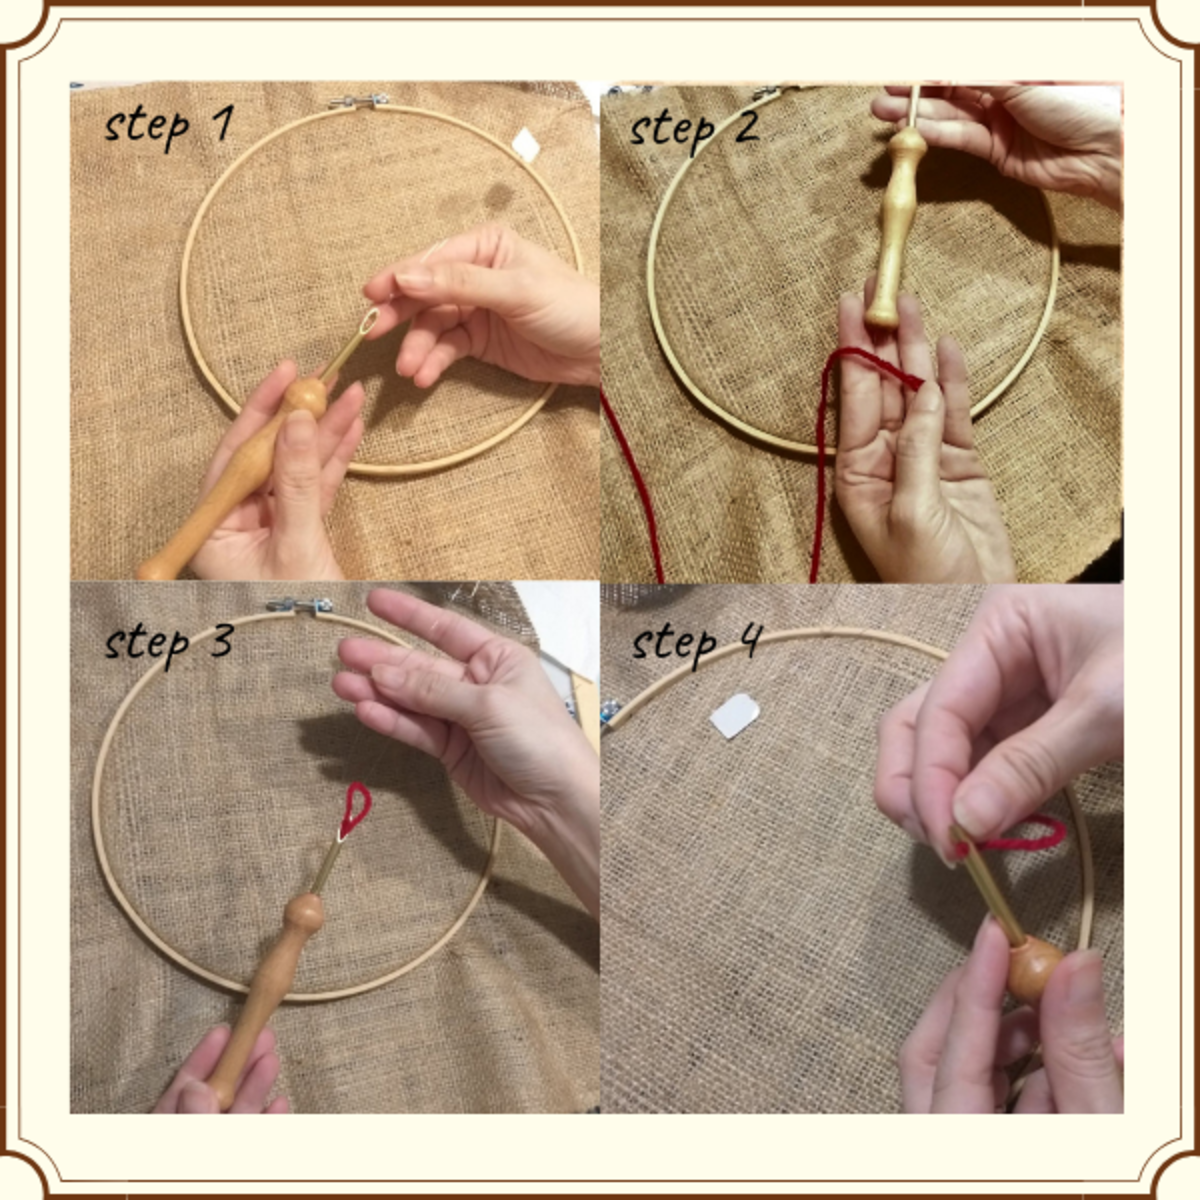 what-to-expect-when-you-start-punch-needle-craft